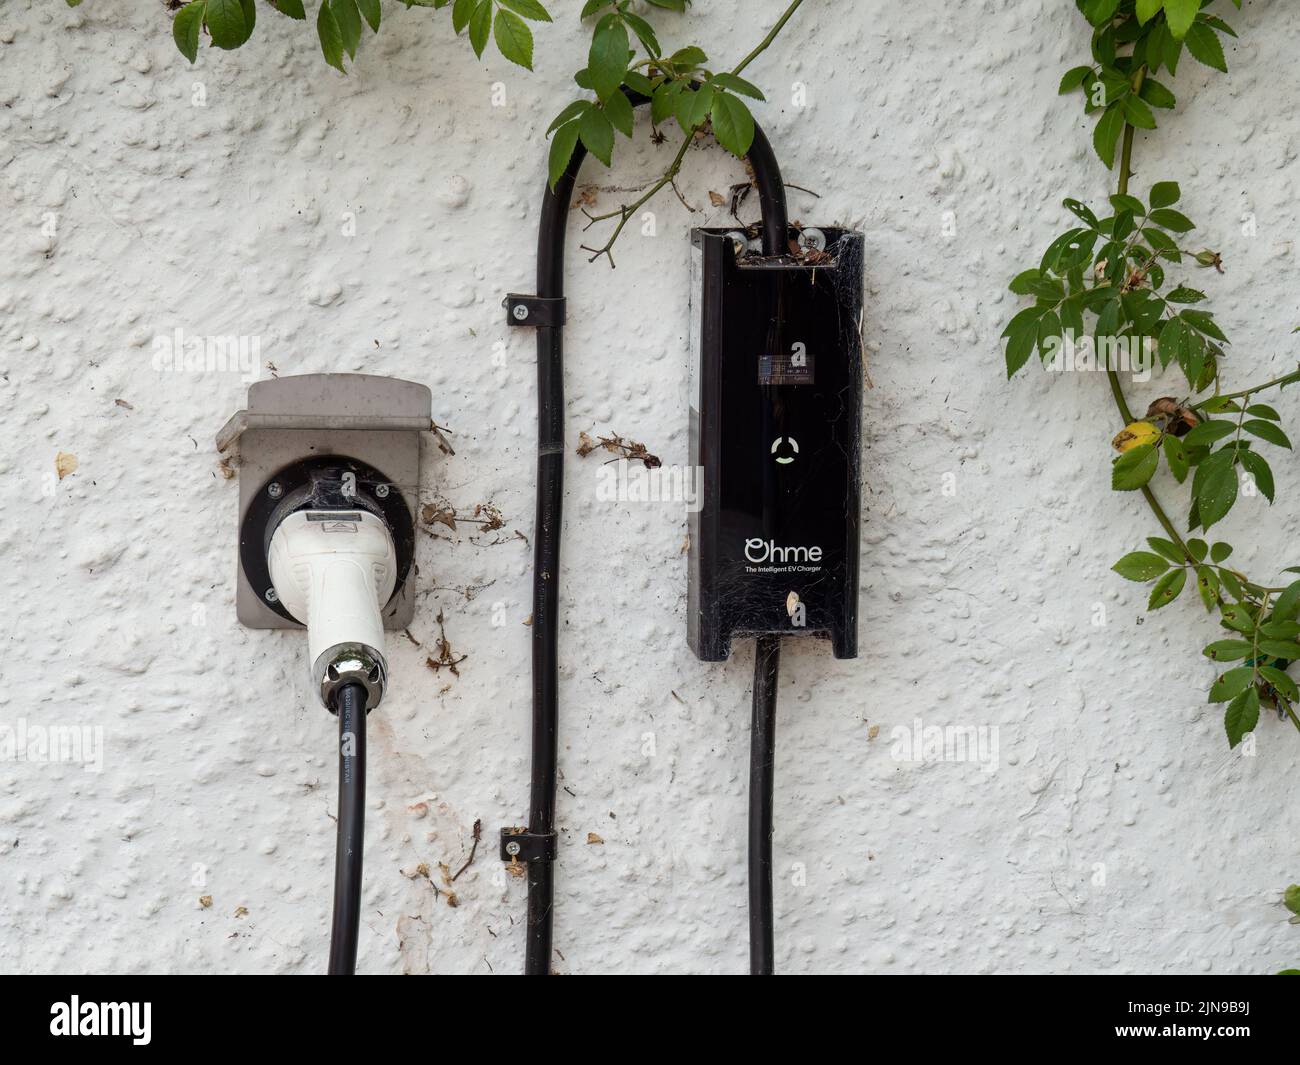 HATHERLEIGH, DEVON, ENGLAND - AUGUST 9 2022: A charger point for an electric car installed in a domestic setting. Brand: Ohme. Stock Photo